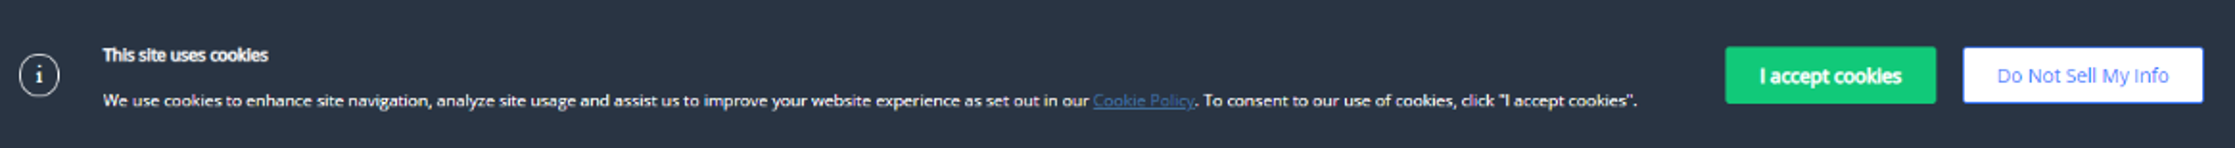 cookie management for myAccount_US_4.png